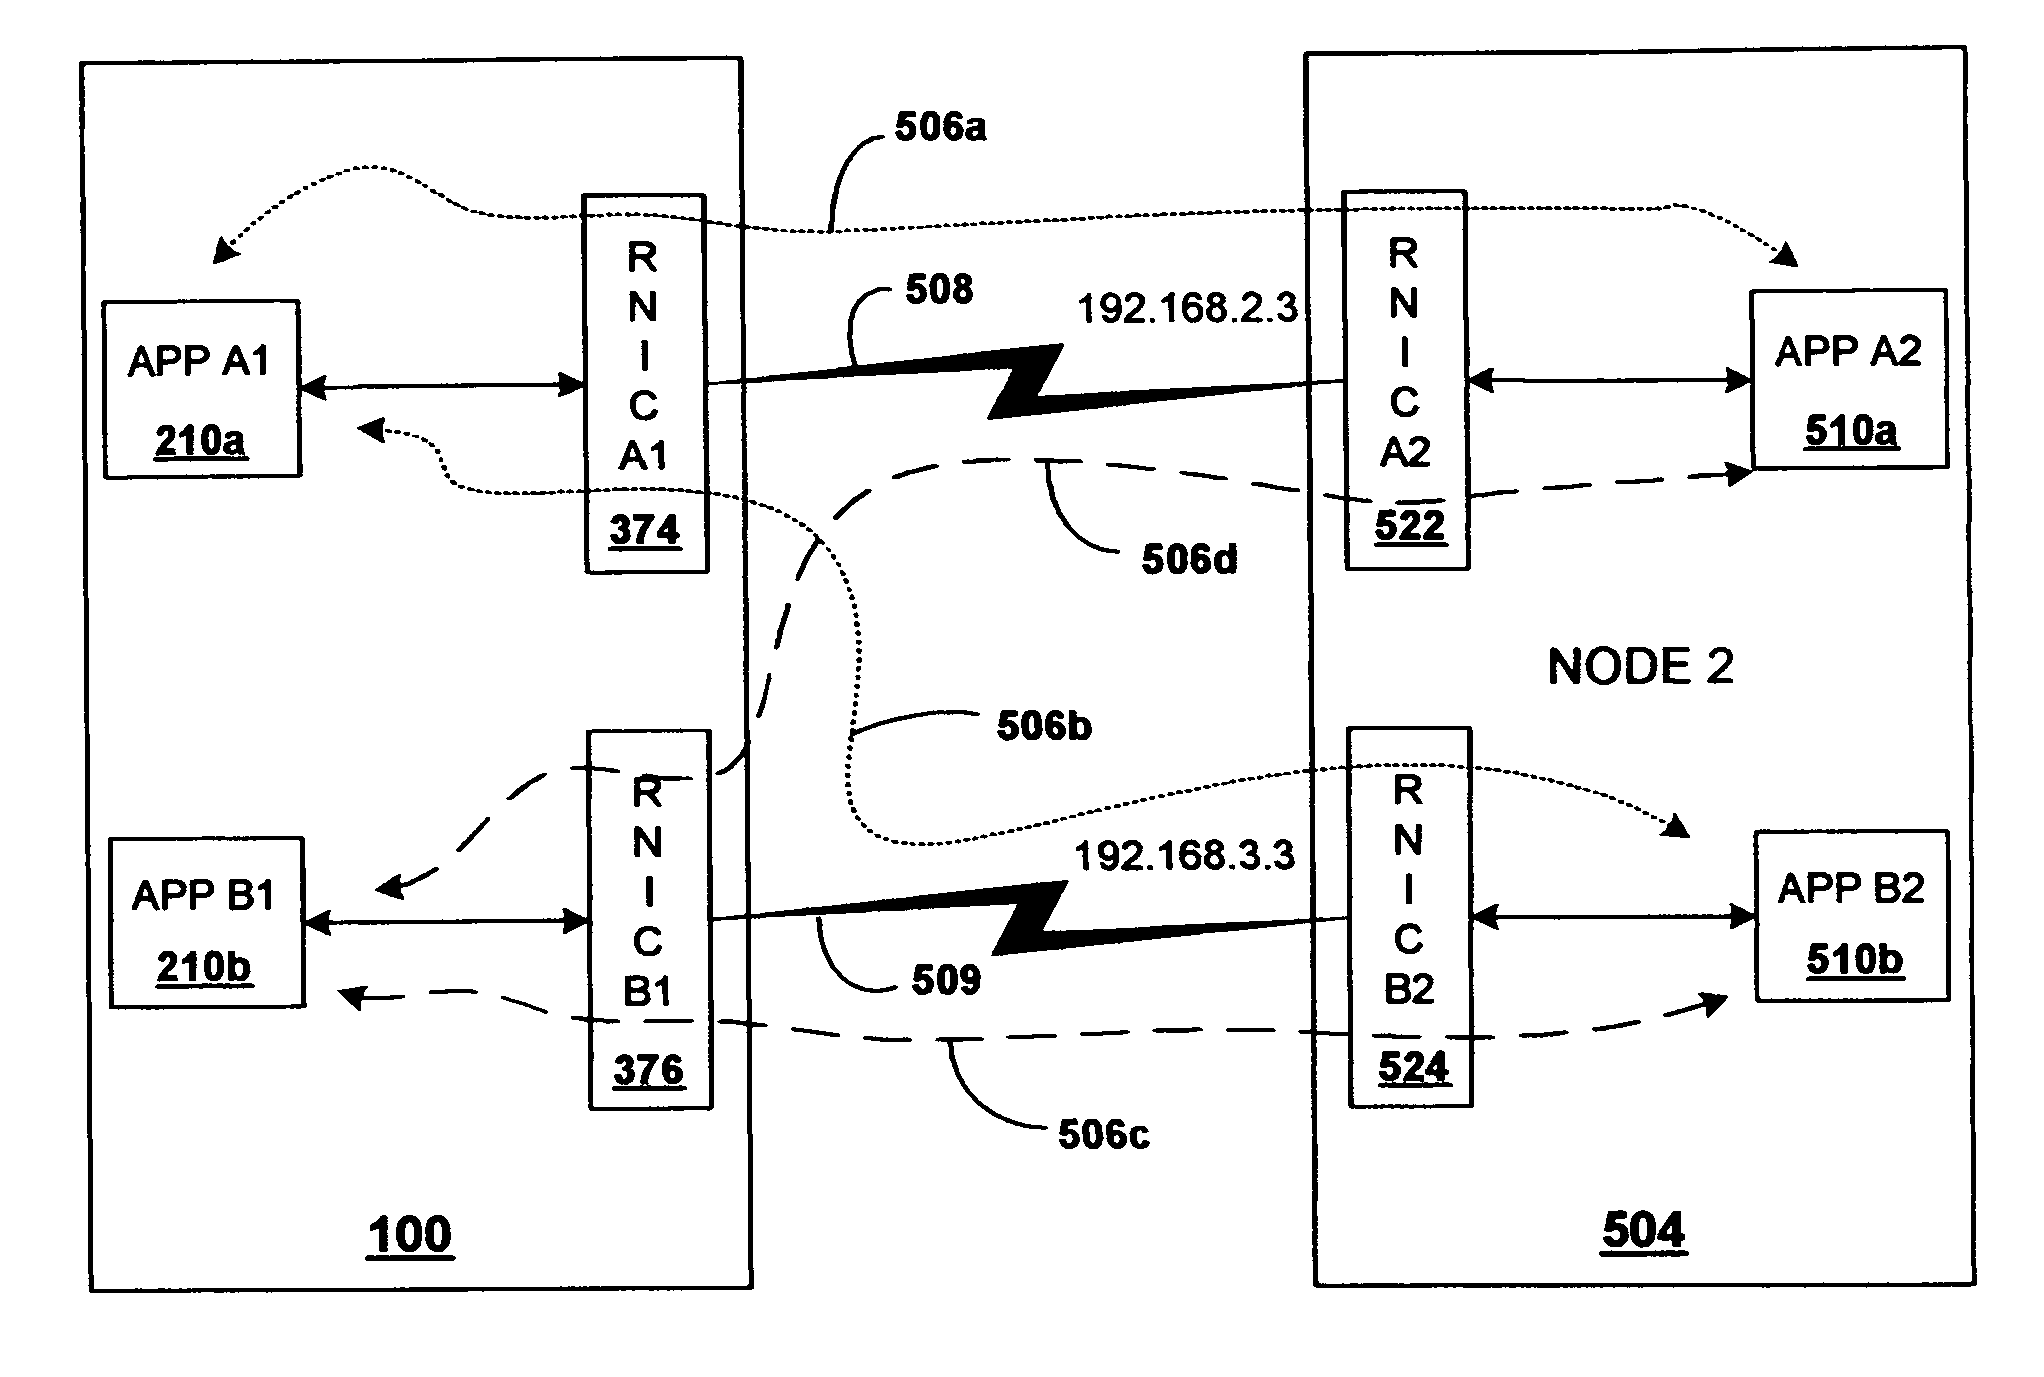 Managing connections through an aggregation of network resources providing offloaded connections between applications over a network